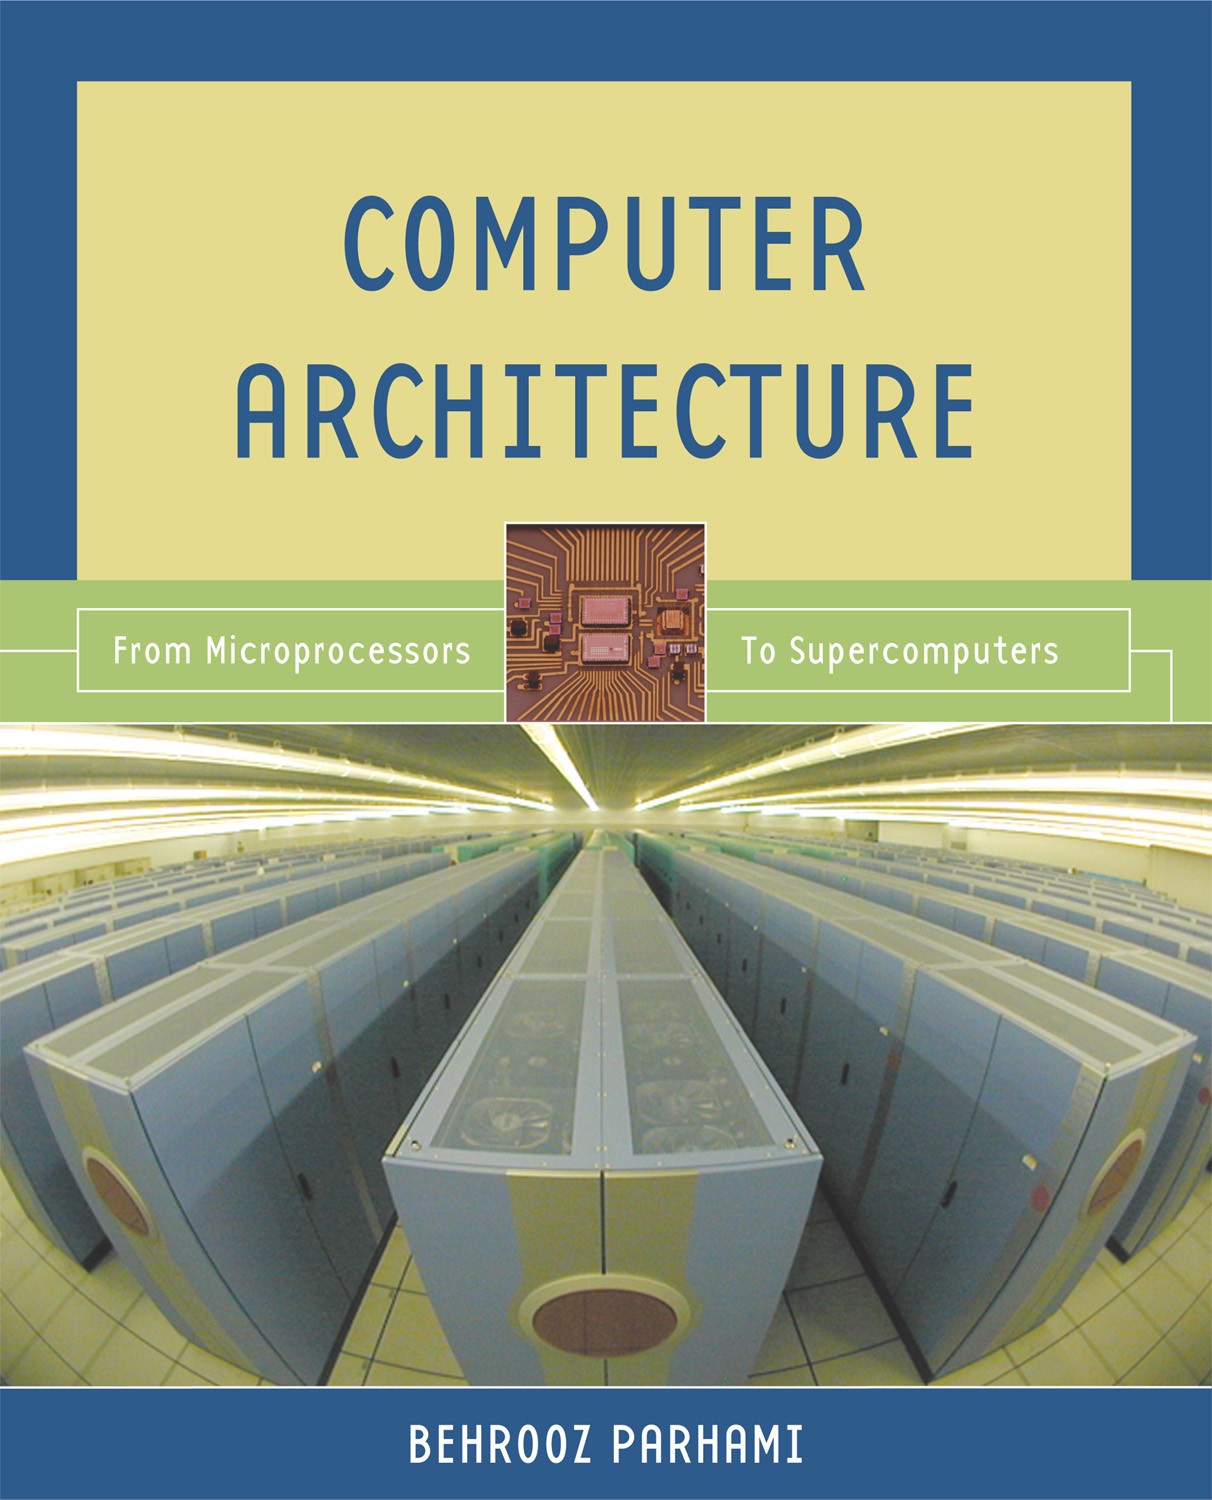 Computer Architecture Textbook